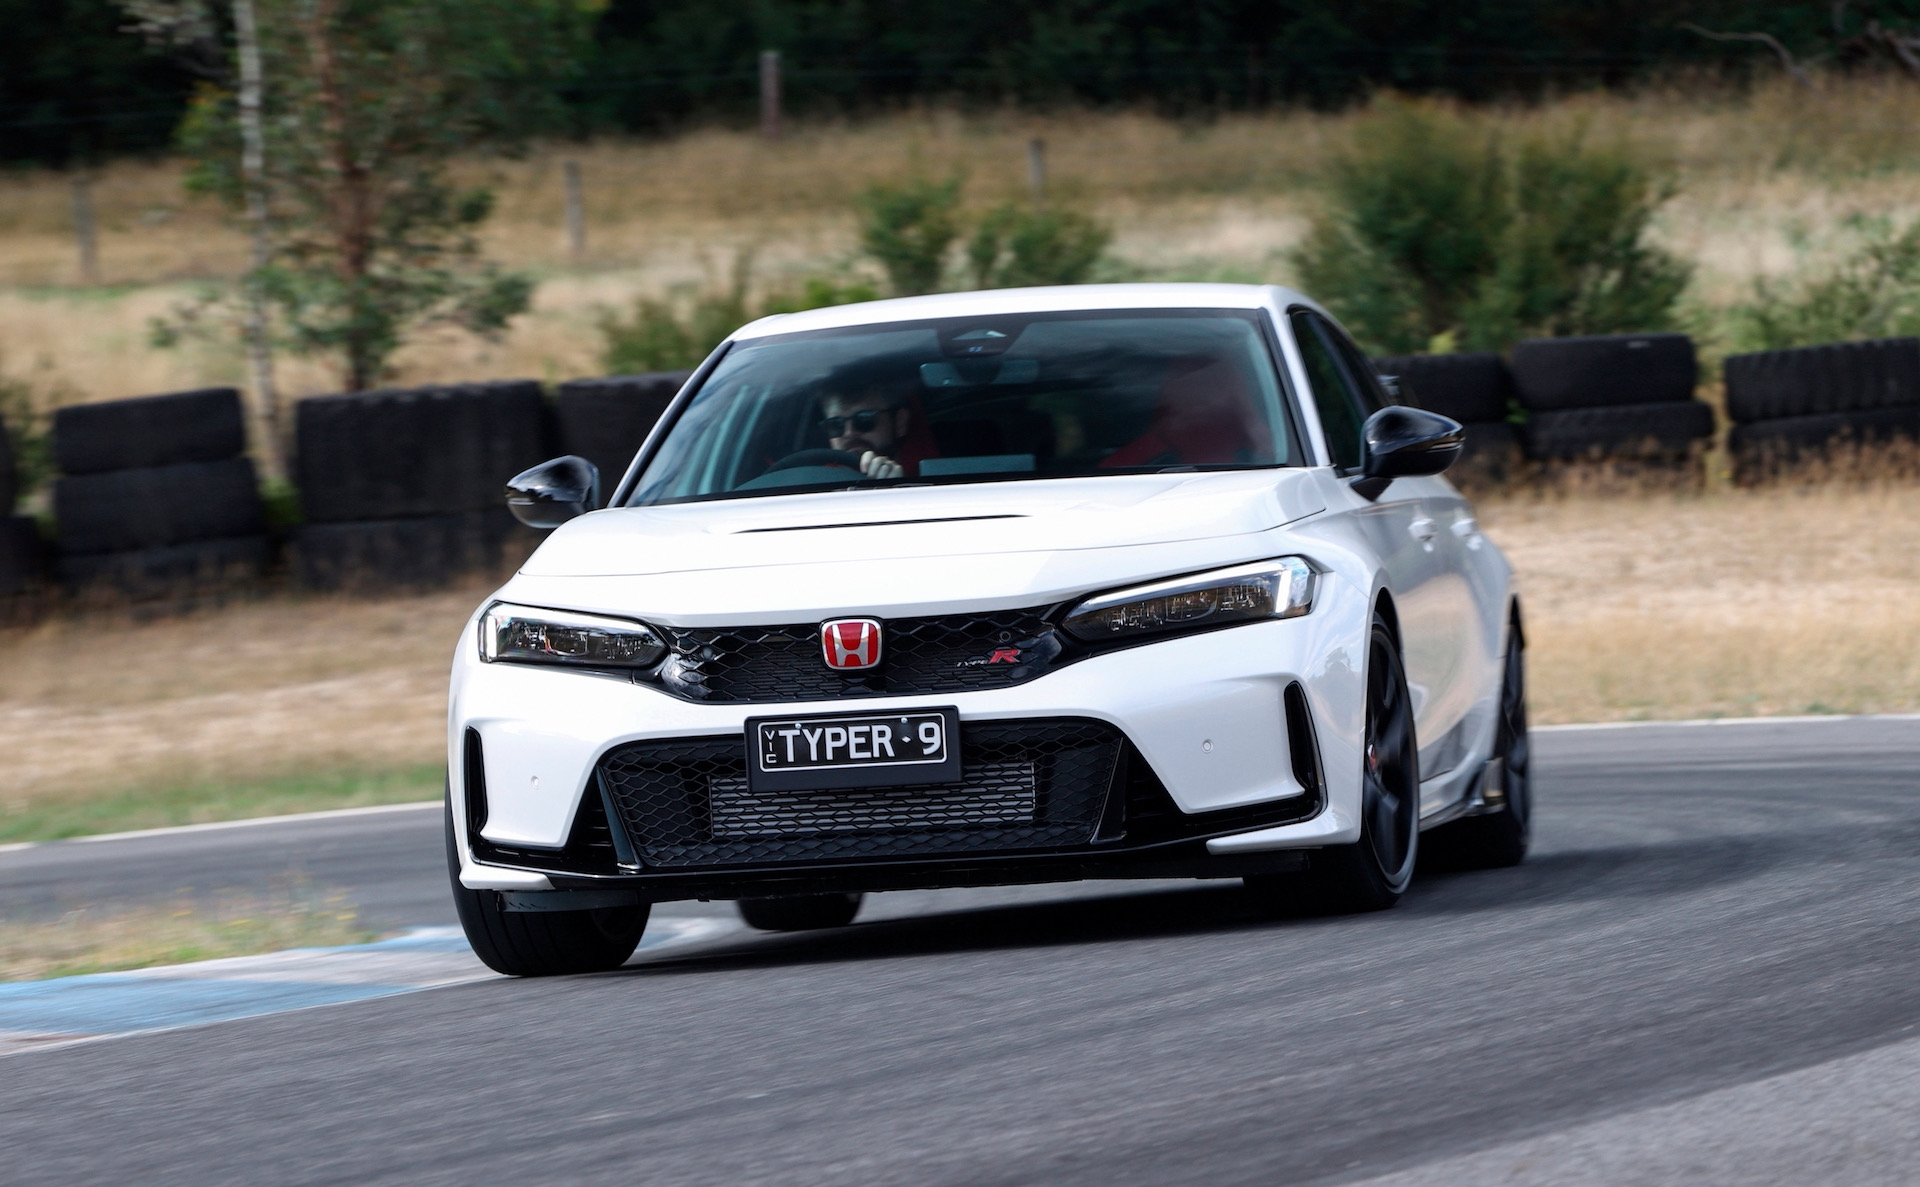 Honda Civic Type R wait times reduced, 500 more units coming